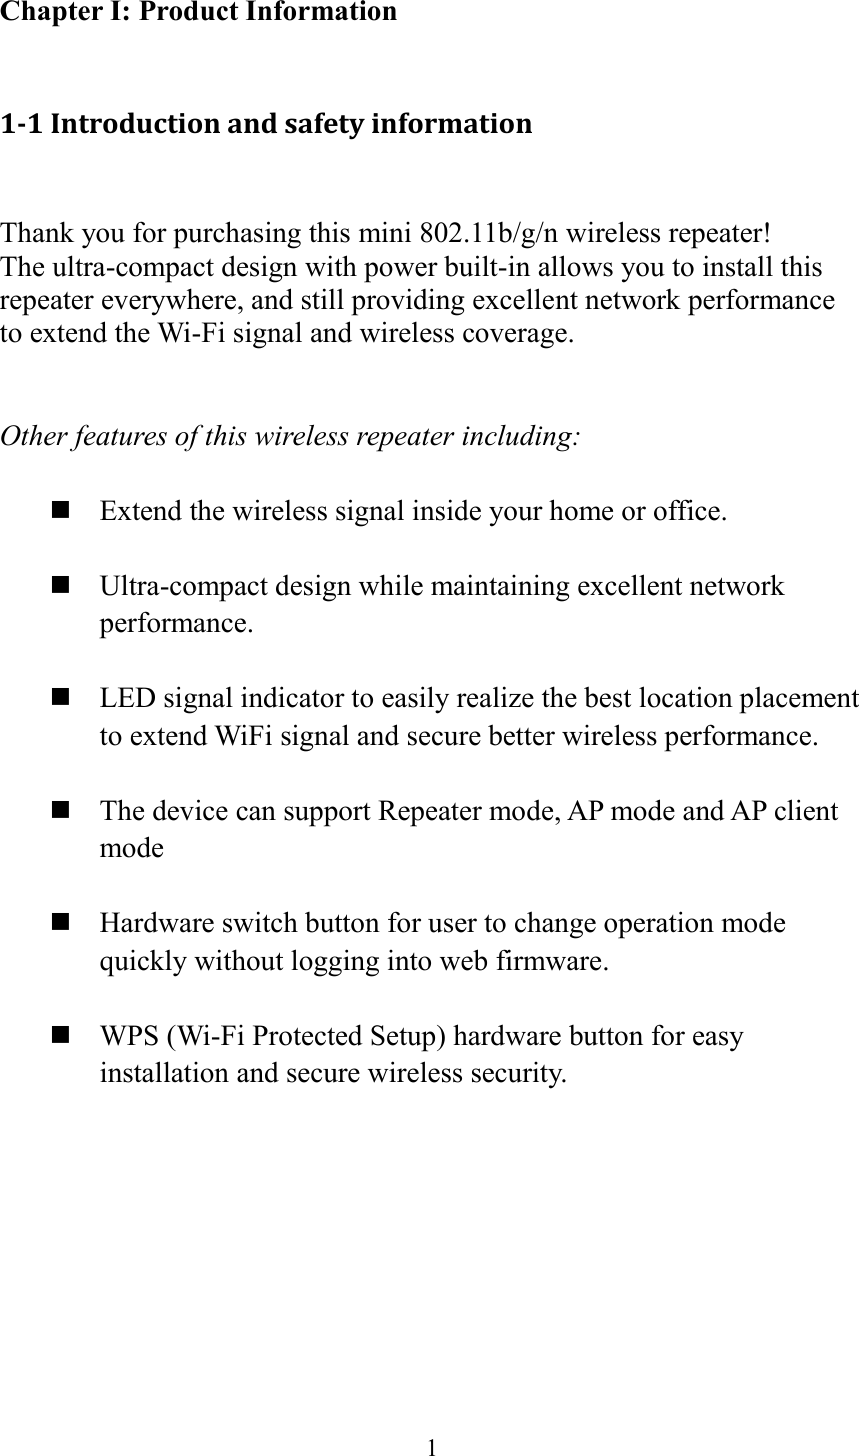  1  Chapter I: Product Information  1-1 Introduction and safety information  Thank you for purchasing this mini 802.11b/g/n wireless repeater! The ultra-compact design with power built-in allows you to install this repeater everywhere, and still providing excellent network performance to extend the Wi-Fi signal and wireless coverage.     Other features of this wireless repeater including:   Extend the wireless signal inside your home or office.   Ultra-compact design while maintaining excellent network performance.   LED signal indicator to easily realize the best location placement to extend WiFi signal and secure better wireless performance.       The device can support Repeater mode, AP mode and AP client mode   Hardware switch button for user to change operation mode quickly without logging into web firmware.   WPS (Wi-Fi Protected Setup) hardware button for easy installation and secure wireless security.    